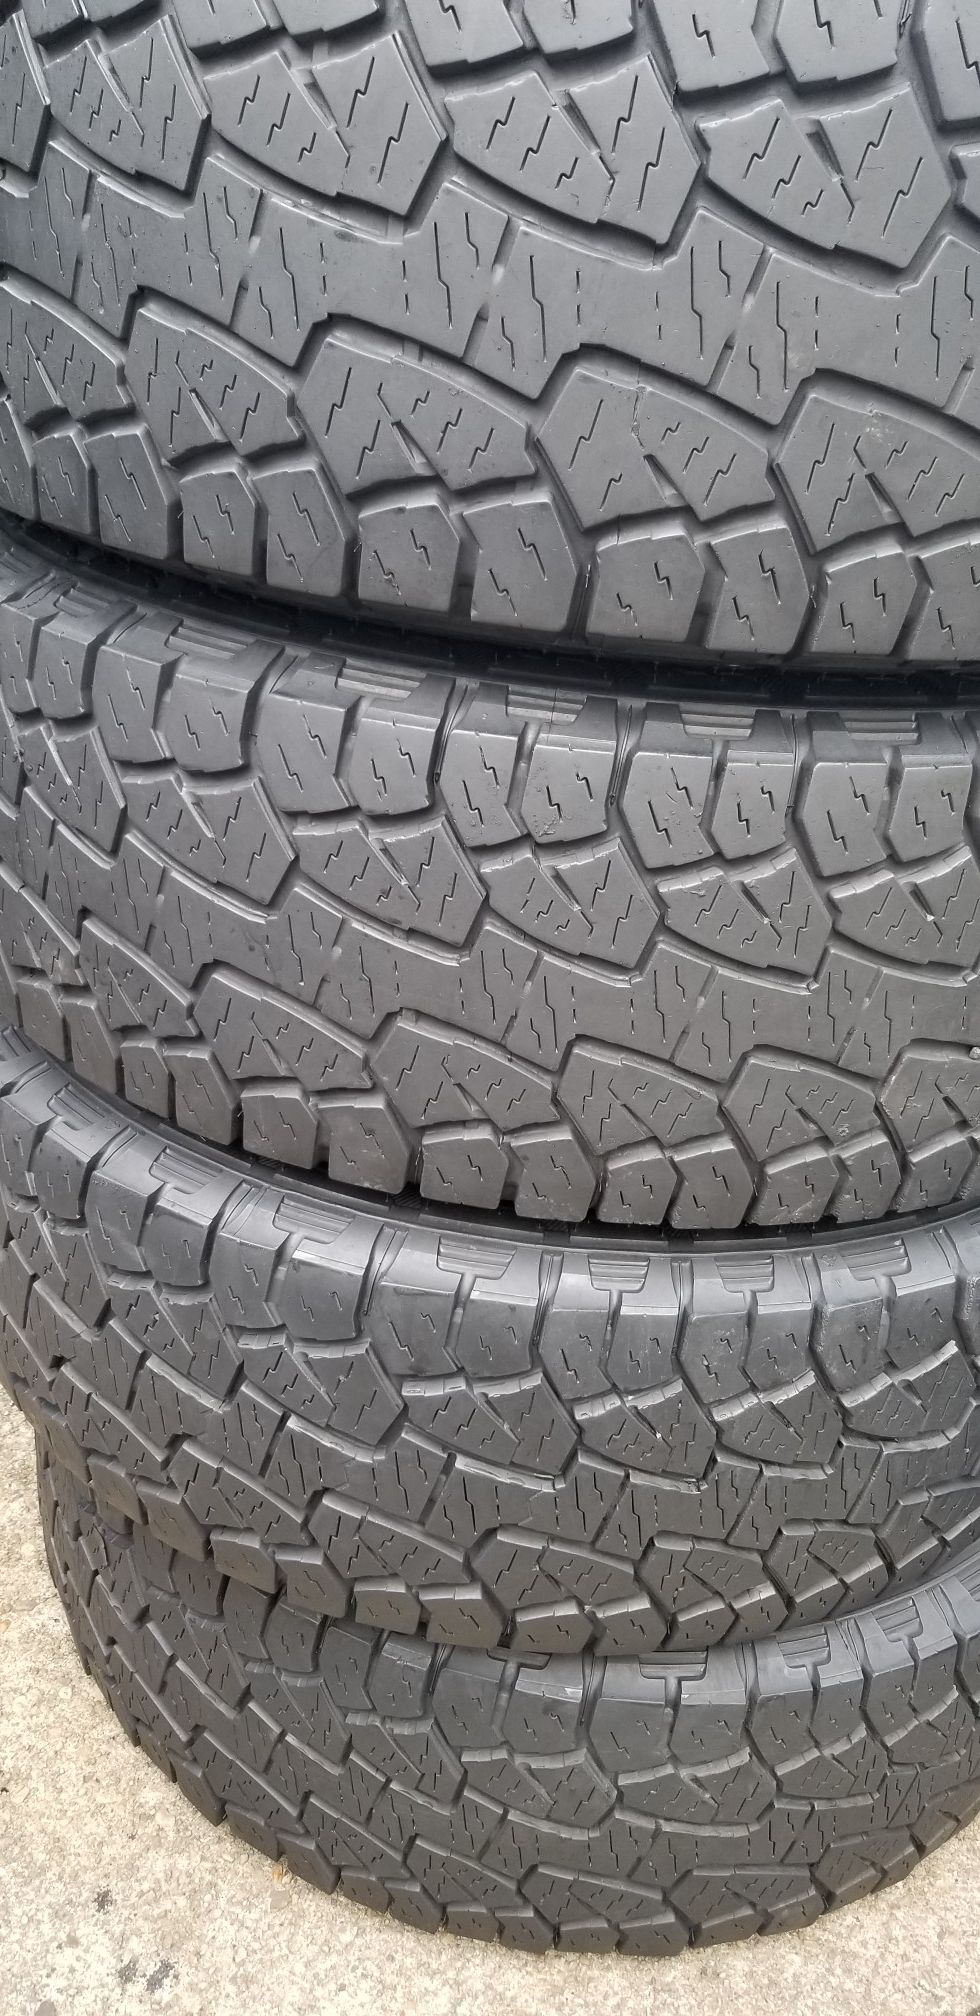 4 fairly used tires. 285 70 17.